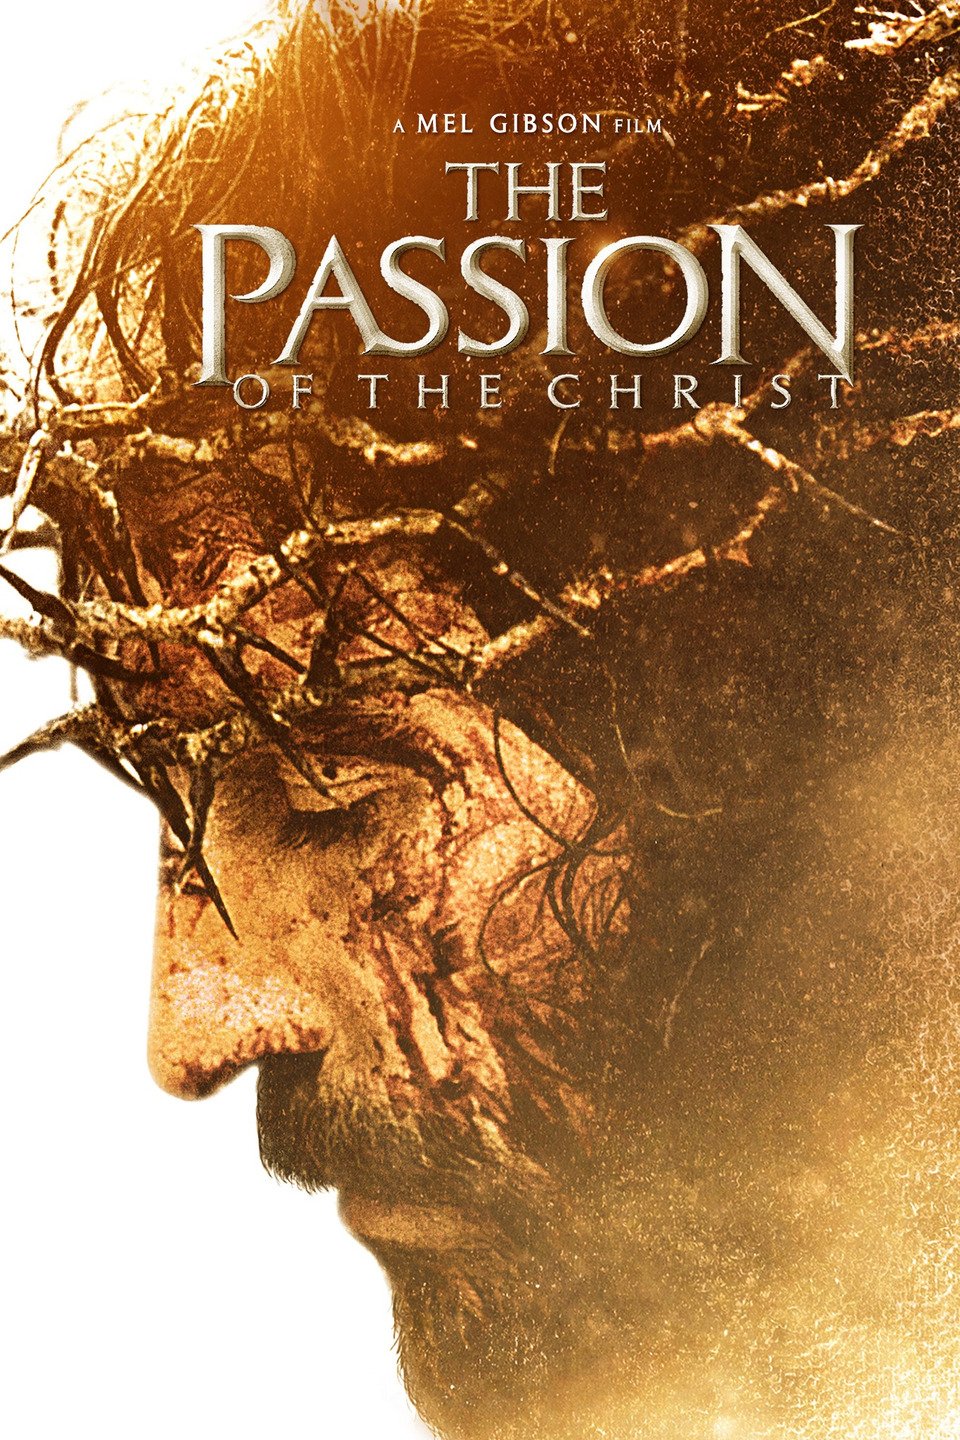 The Passion of the Christ Mel Gibson movies